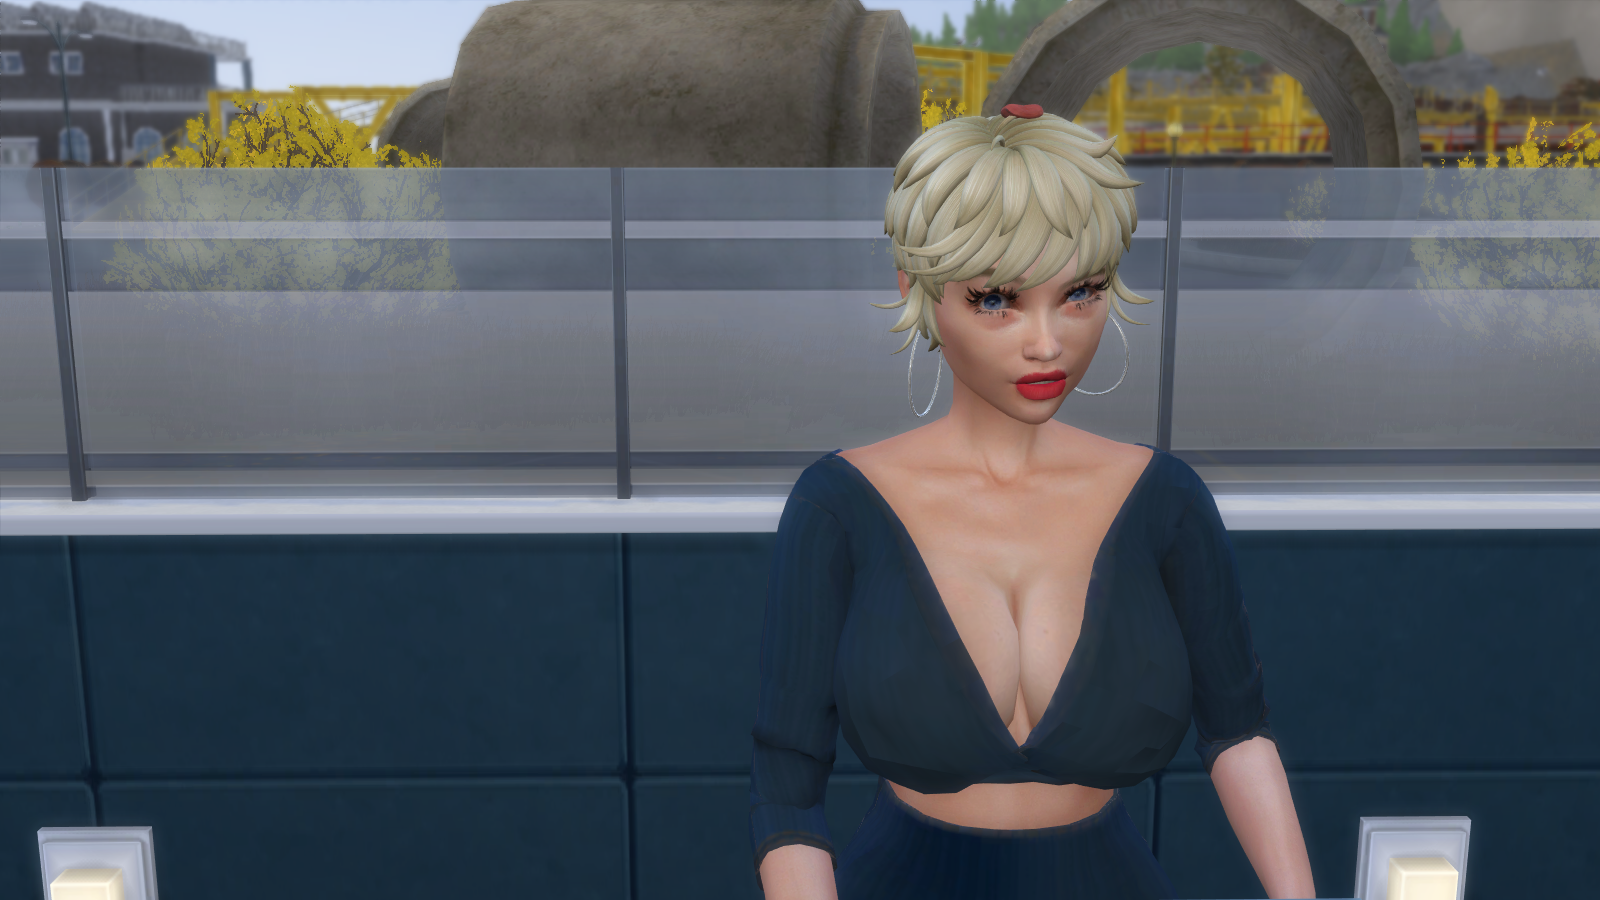 Wcif This Skin Overlay Request And Find The Sims 4 Loverslab